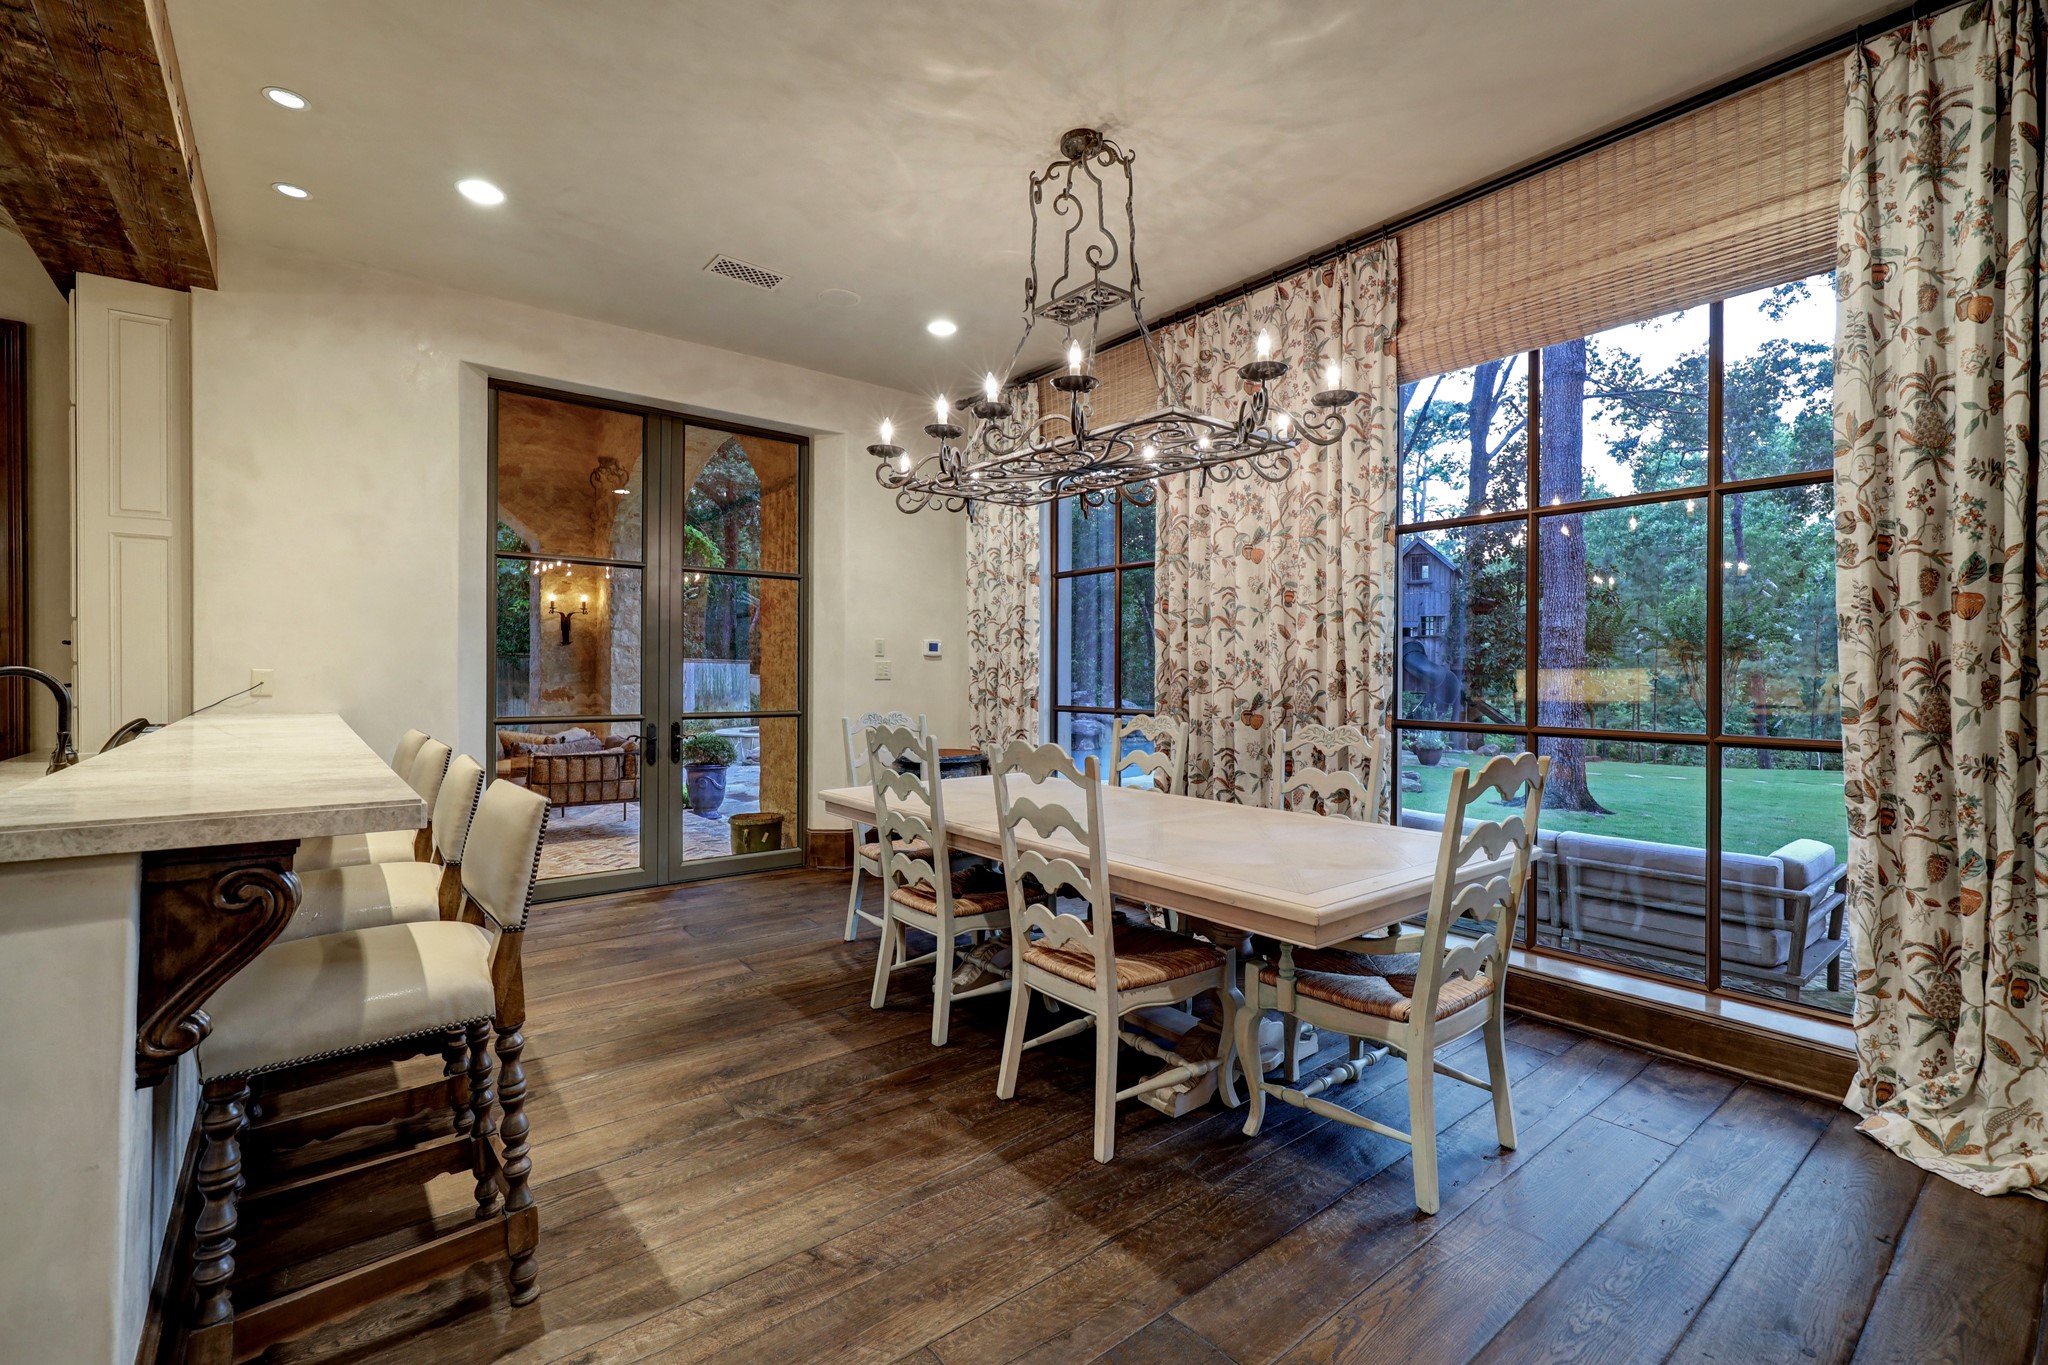 The Breakfast Room (19' x 12') with prime views of the backyard grounds.